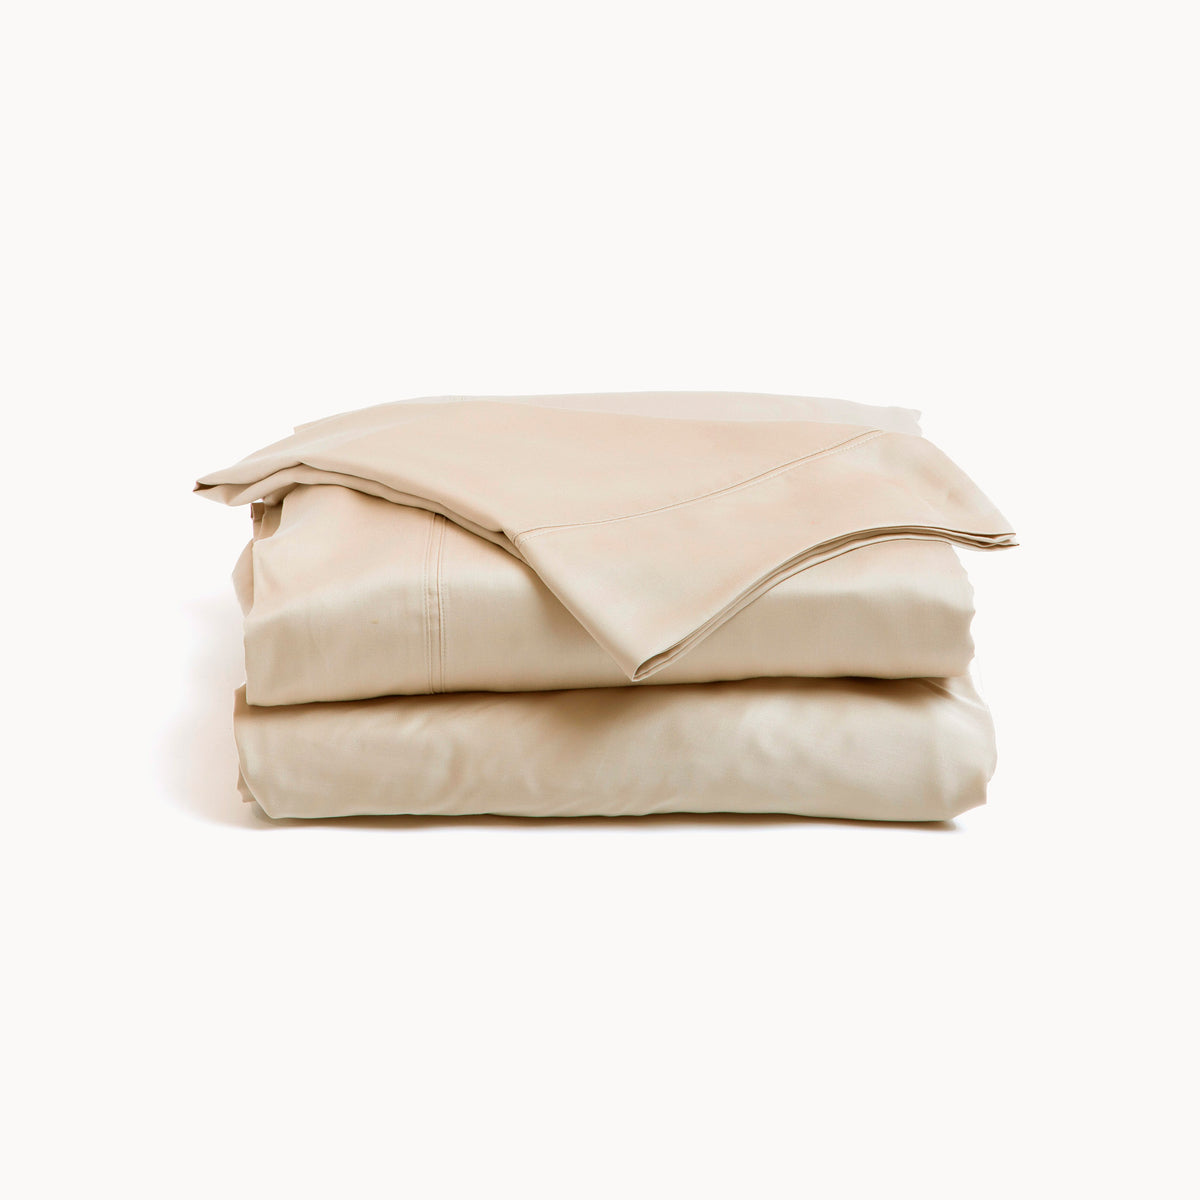 Image showcasing entire Ivory Recovery Viscose Sheet Set all neatly folded on top of one another with a white background. The image shows (from top to bottom): pillowcase, flat sheet, fitted sheet